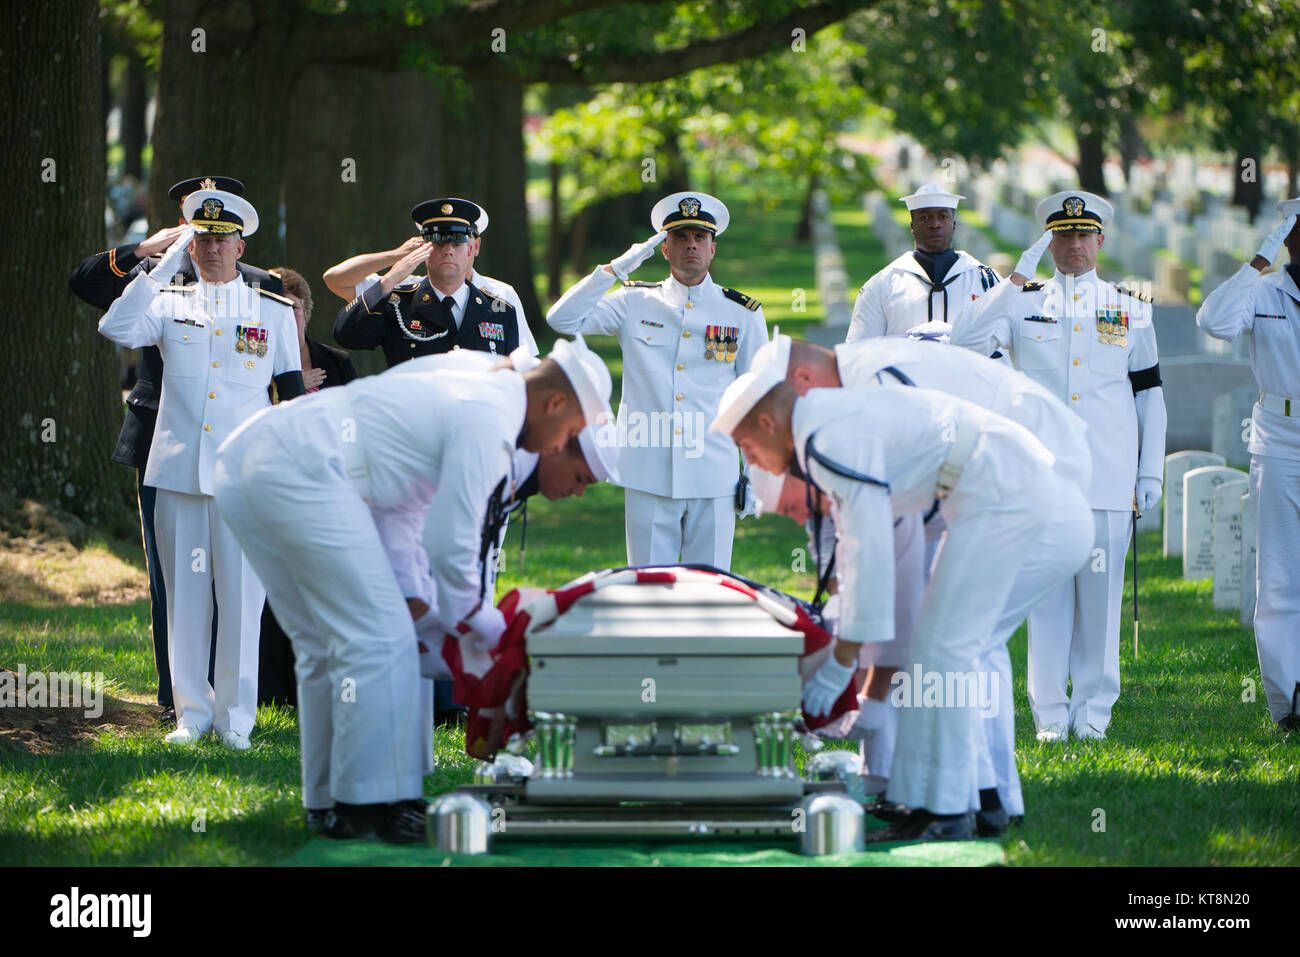 The U.S. Navy Honor Guard participates in the graveside service for U.S. Navy Petty Officer 1st Class Xavier A. Martin at Arlington National Cemetery, Arlington, Va., Aug. 9, 2017.  Martin perished when the USS Fitzgerald (DDG 62) was involved in a collision with the Philippine-flagged merchant vessel ACX Crystal, flooding the berthing compartment he was occupying.  Martin was buried with standard honors in Section 60. (U.S. Army photo by Elizabeth Fraser / Arlington National Cemetery / released) Stock Photo